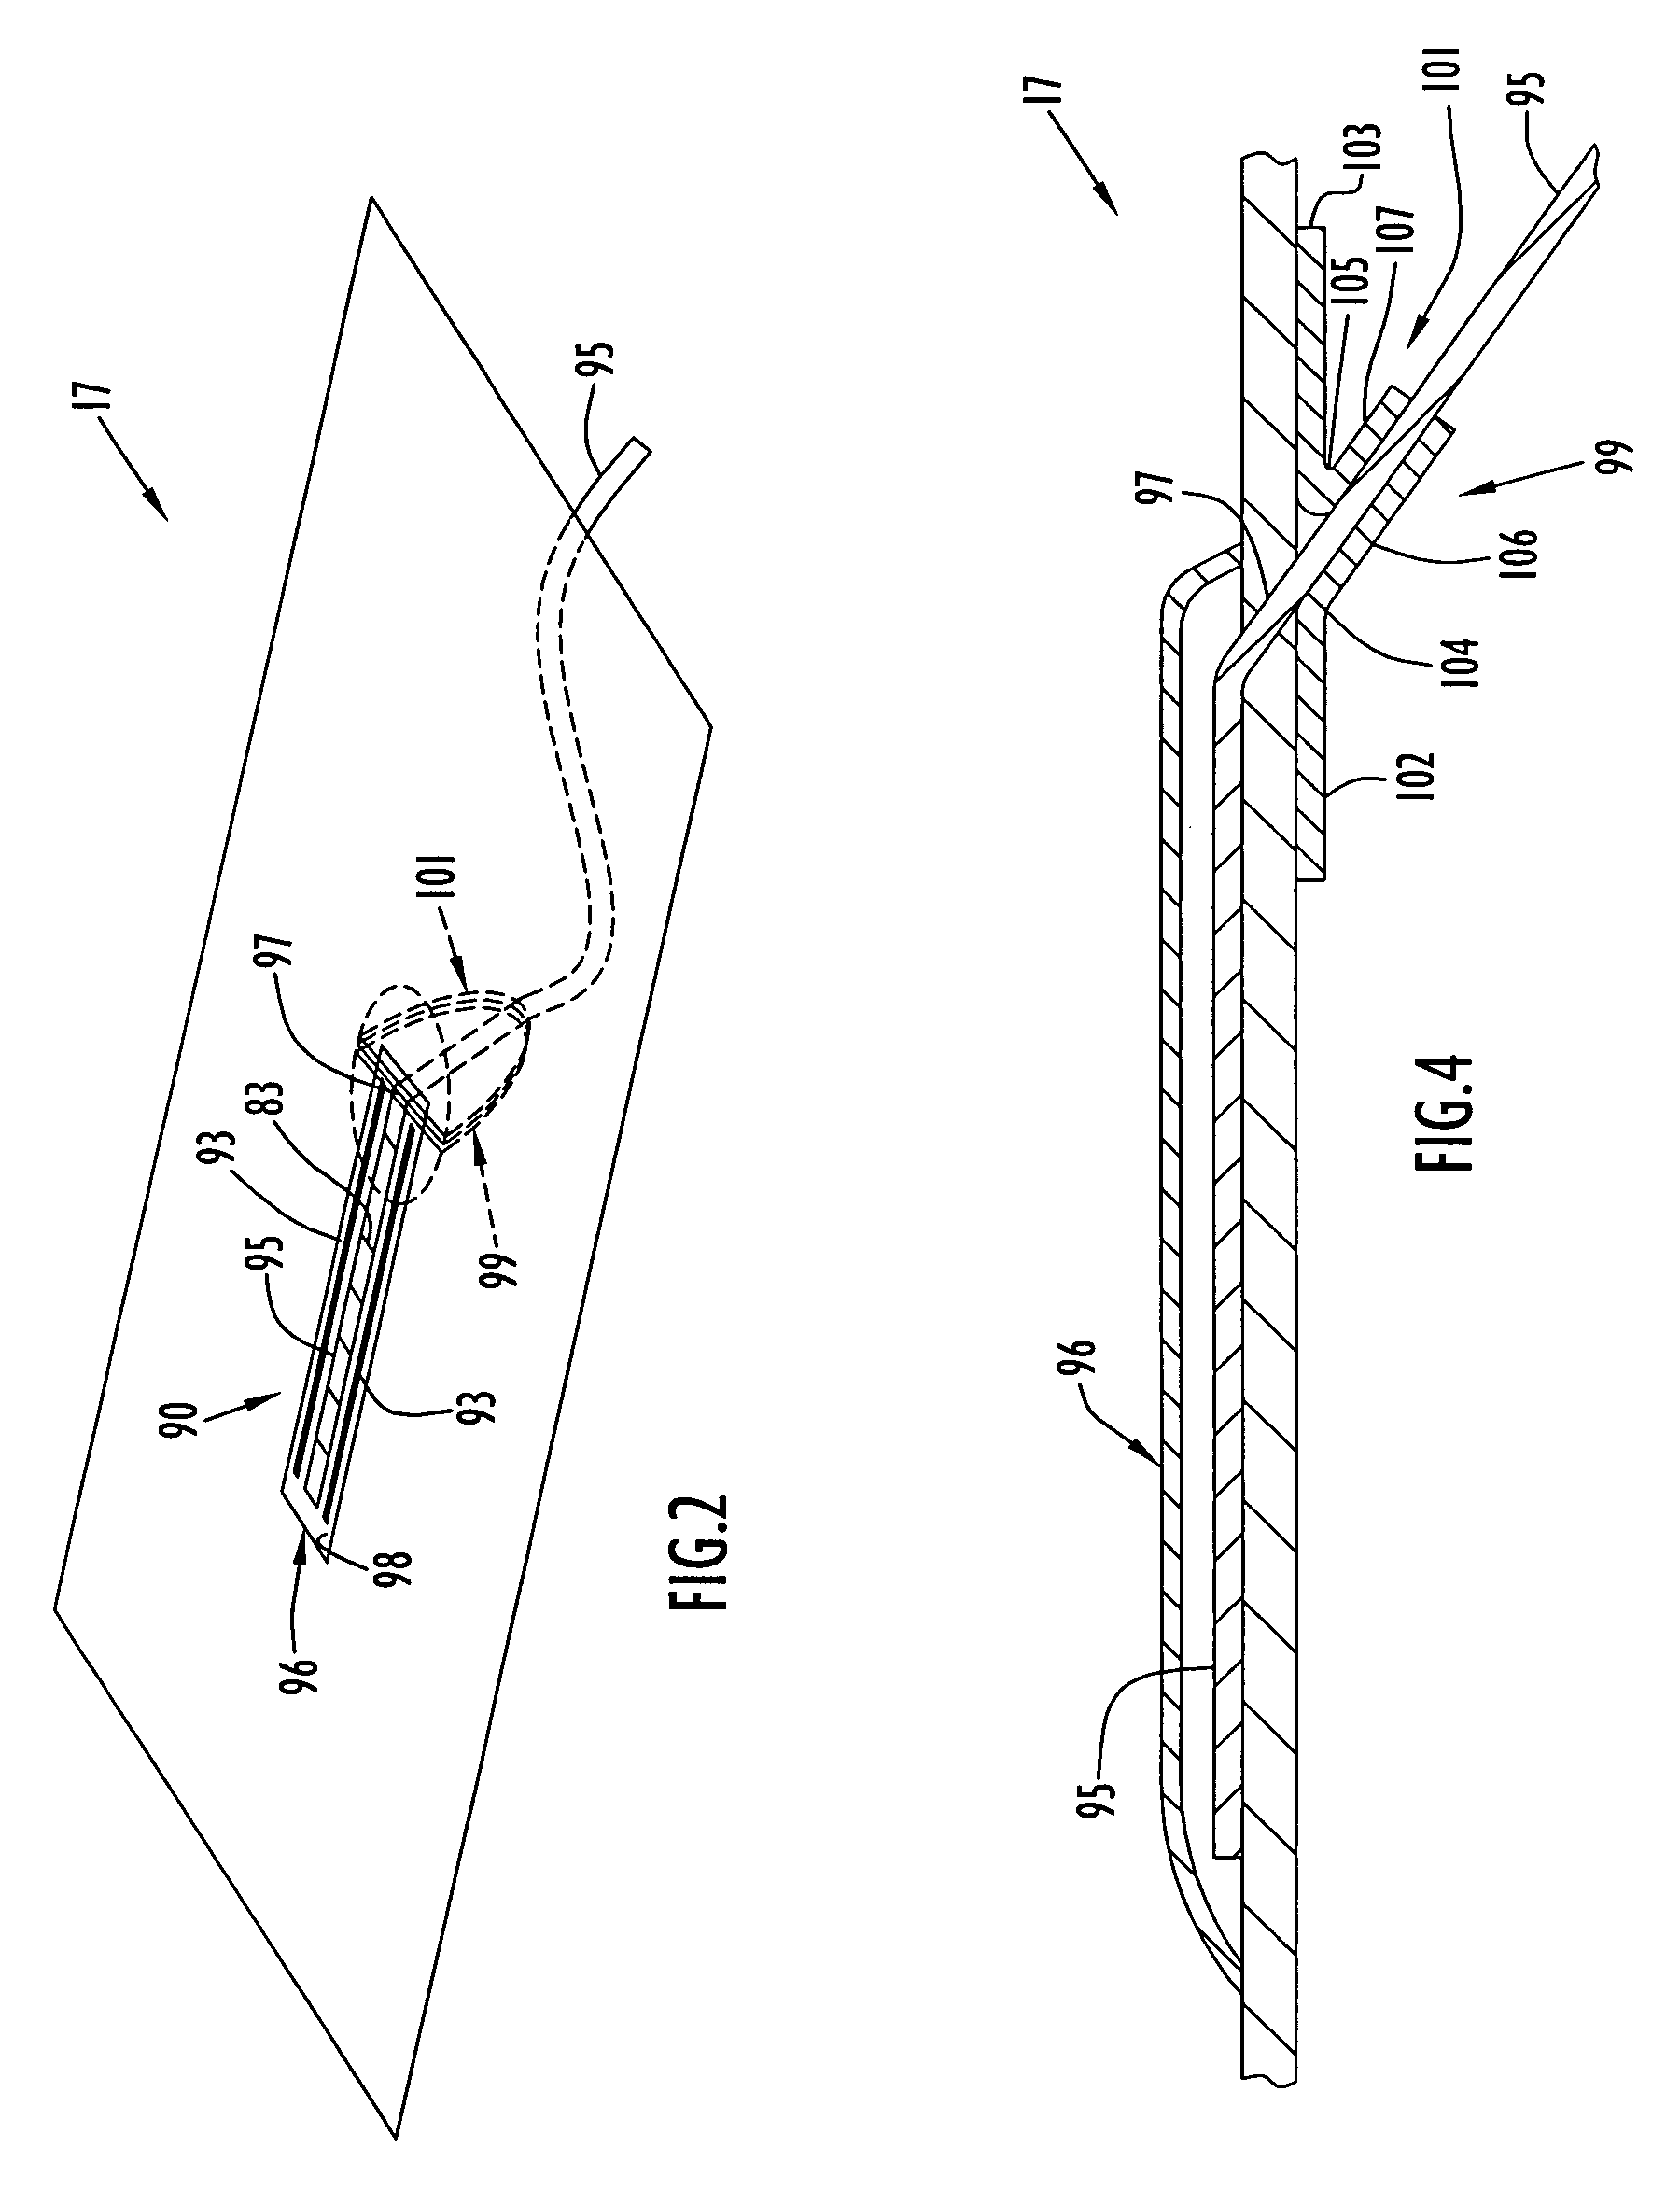 System and method of detecting fluid and leaks in thermal treatment system basins